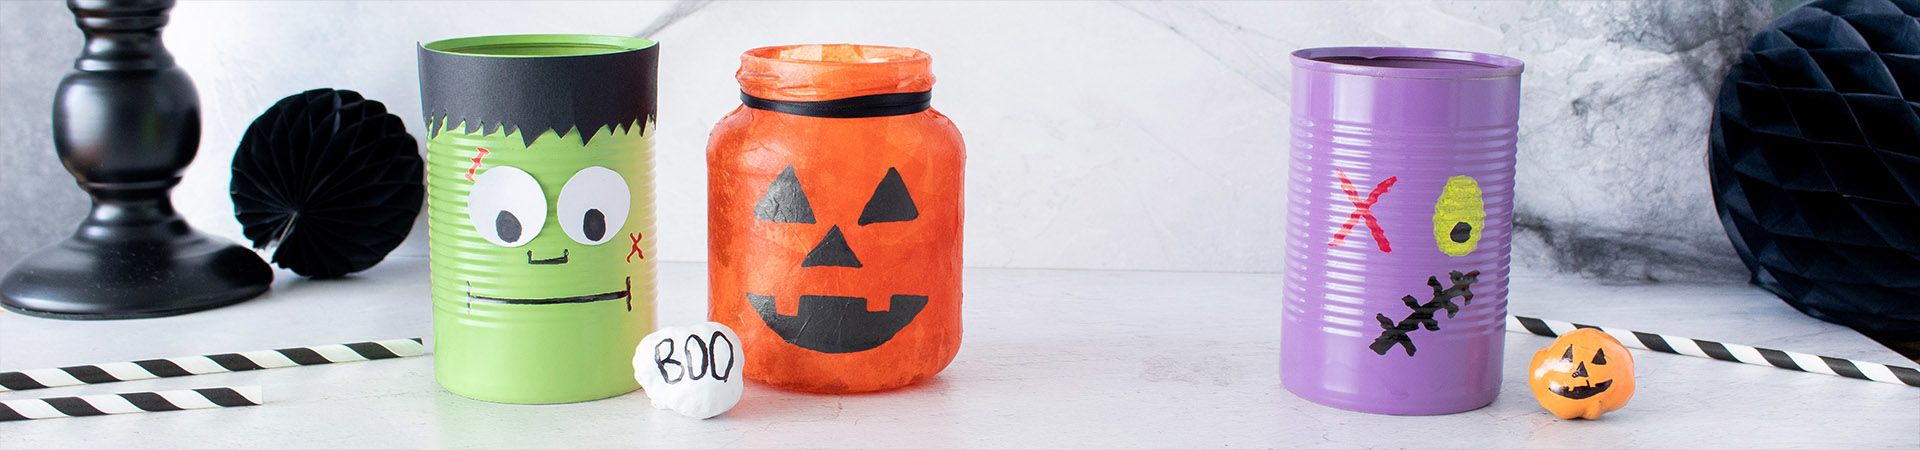 Make your own Halloween decorations: different crafted Halloween decorations on a table.